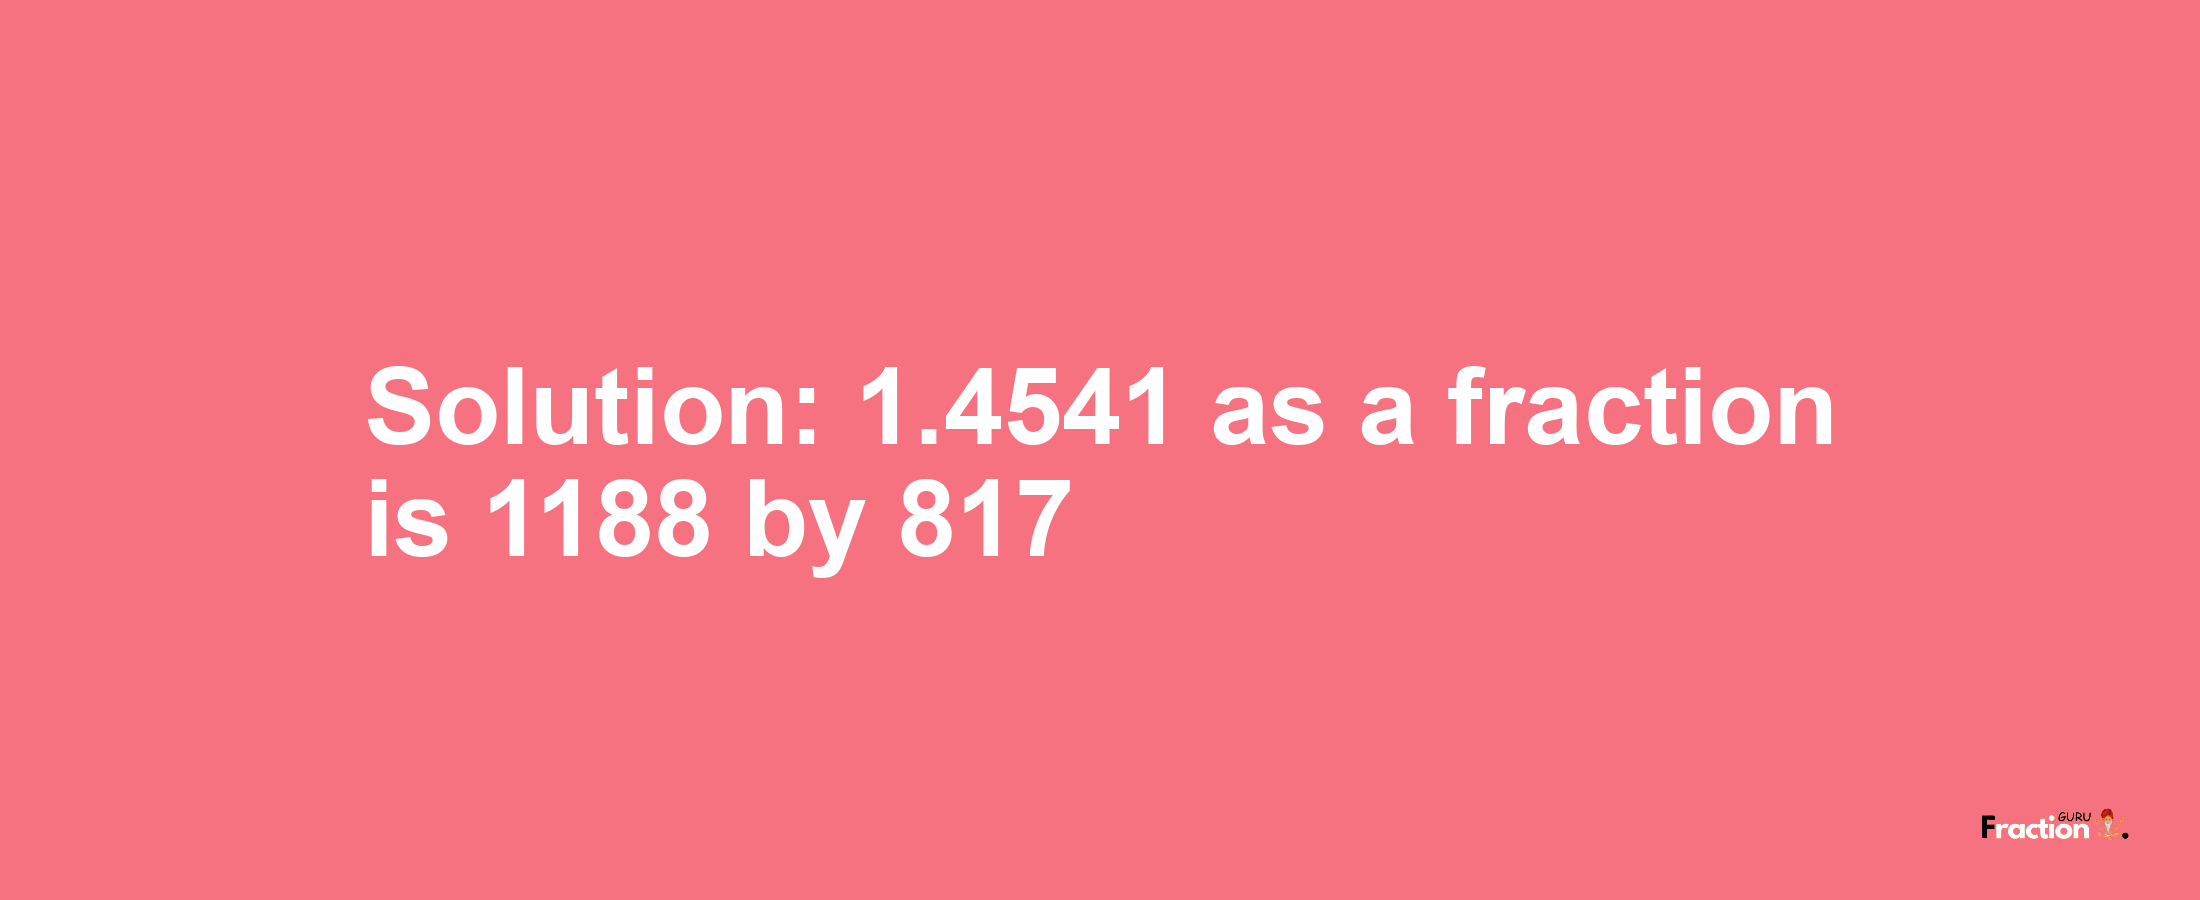 Solution:1.4541 as a fraction is 1188/817